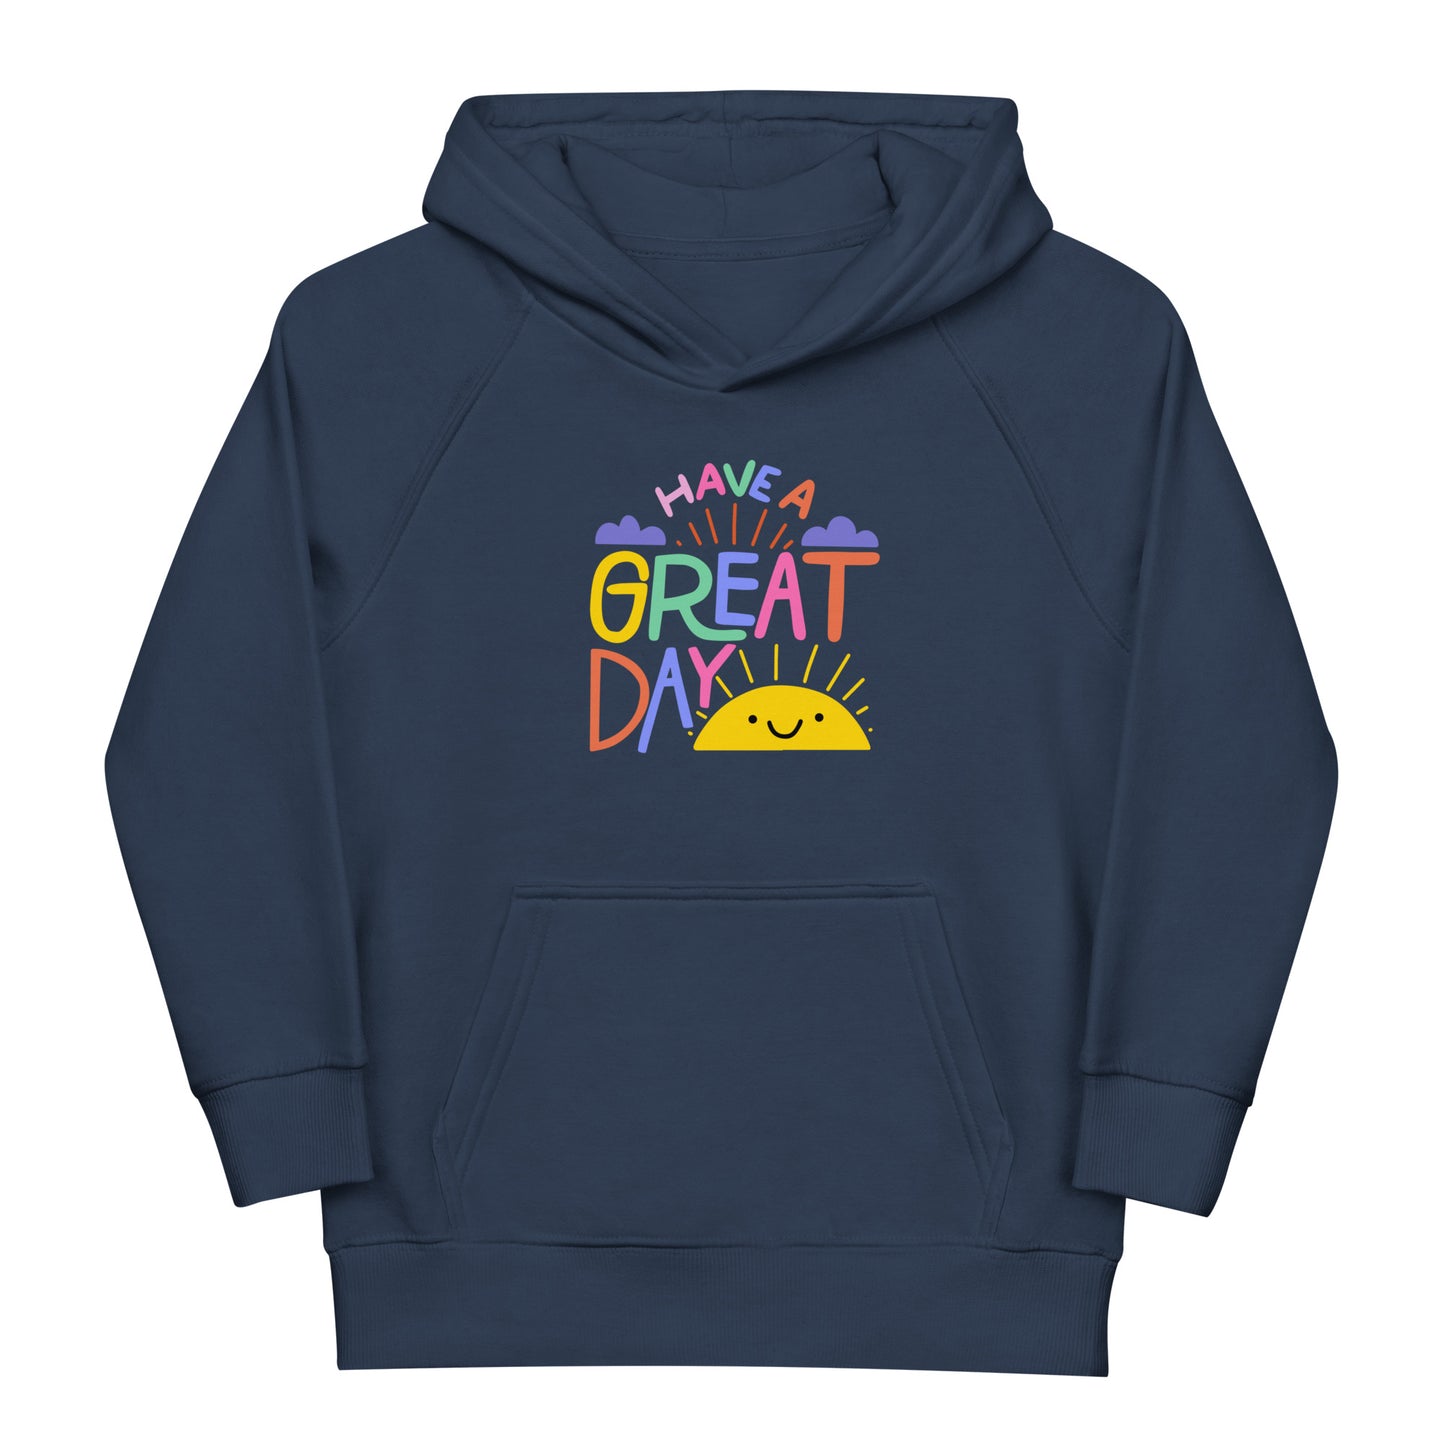 Have a Great Day Kids Eco Hoodie - Spreading Positivity